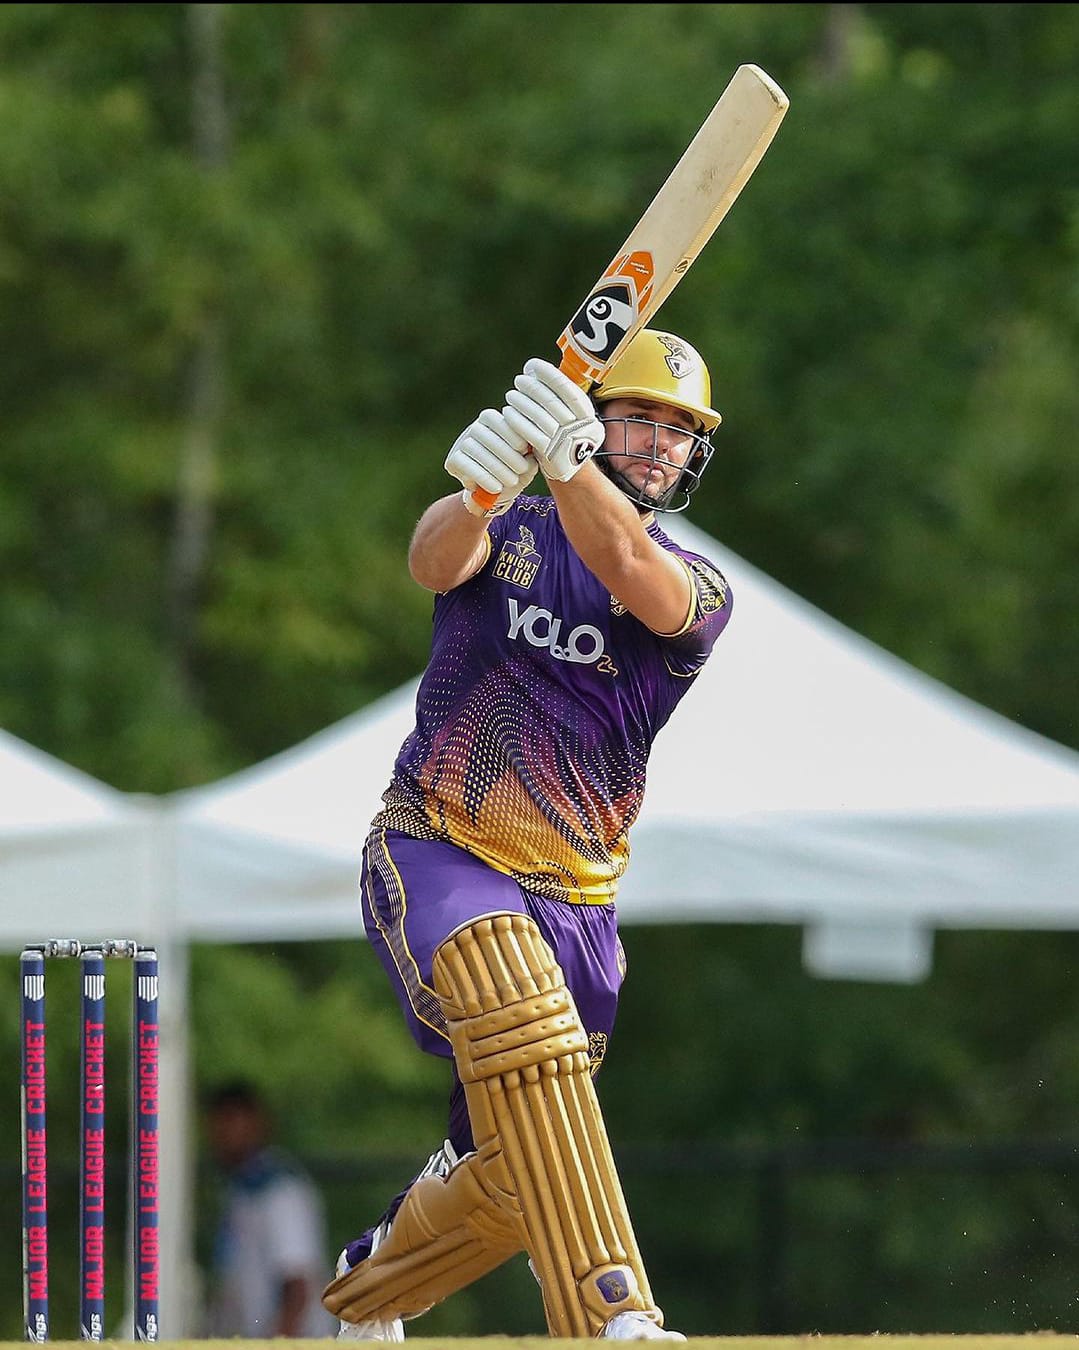 Rilee Rossouw Batting for LAKR. Pic Credits-Twitter